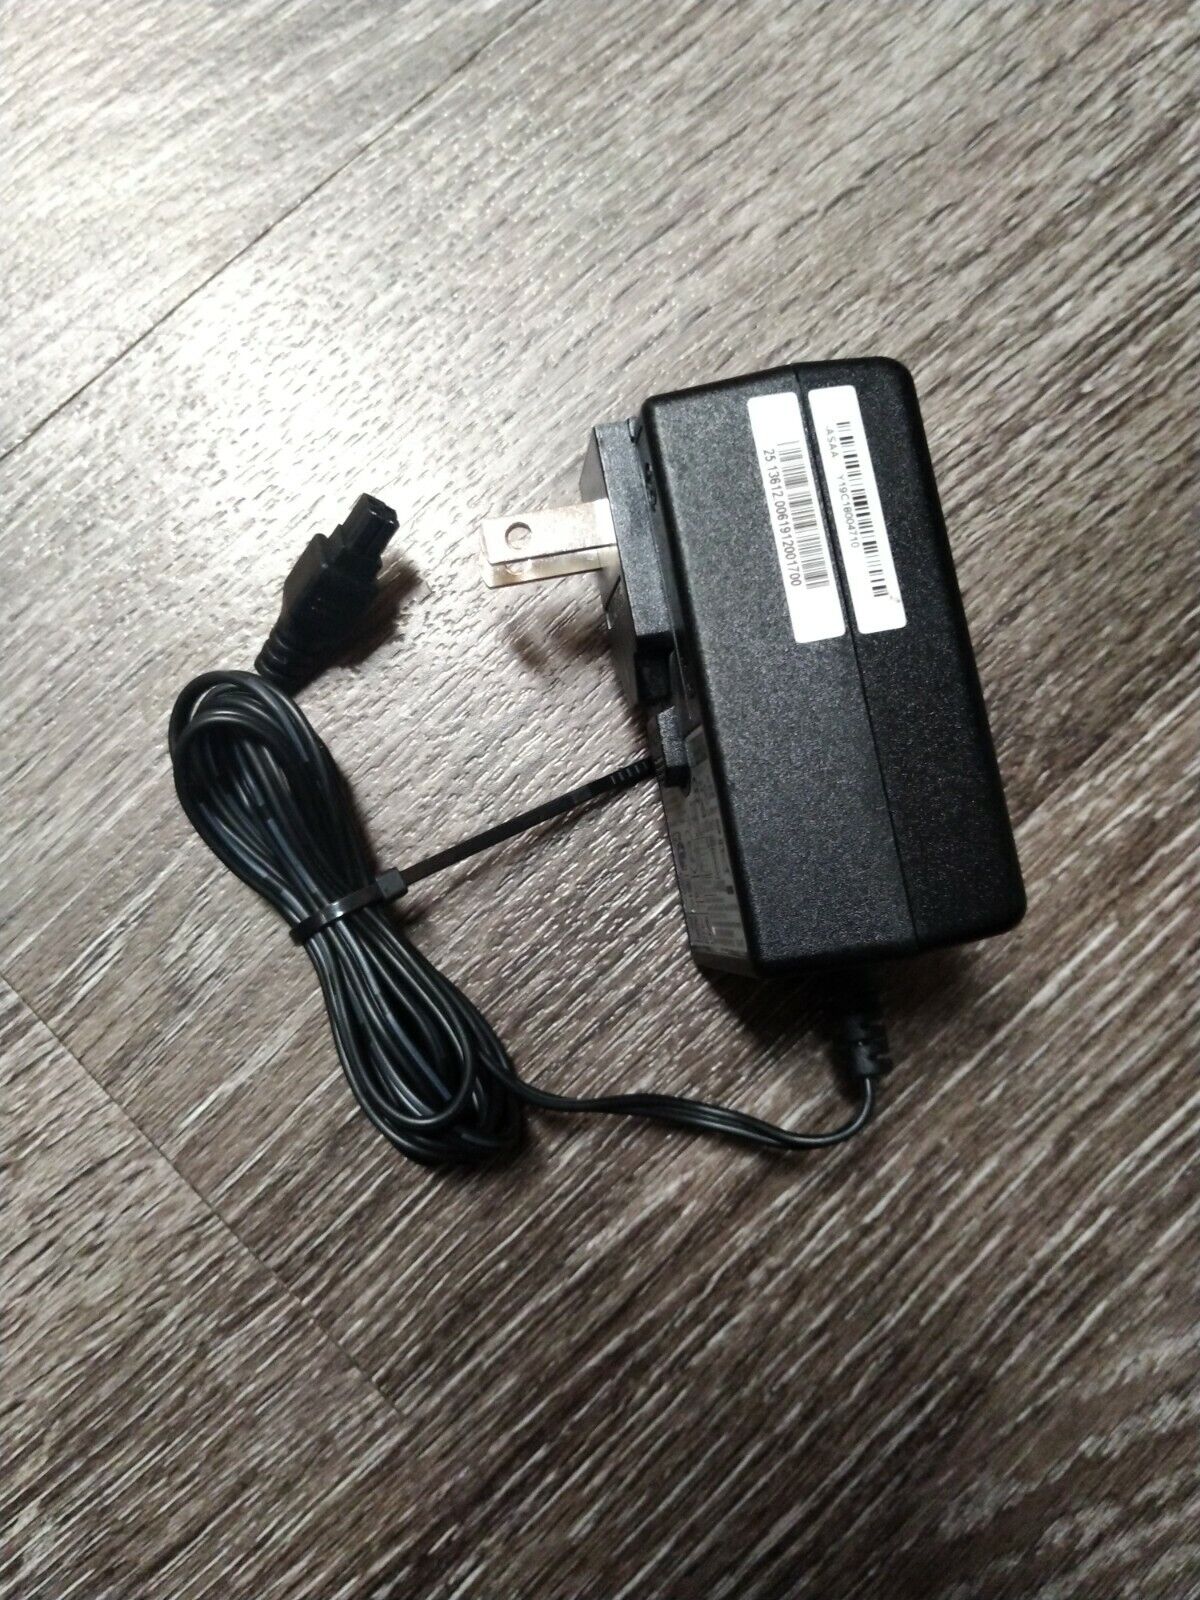 Cradlepoint Power Cable AC Adapter for IBR600 IBR900 IBR1100 IBR1700 E300 R1900 Having a versatile power supply you can - Click Image to Close